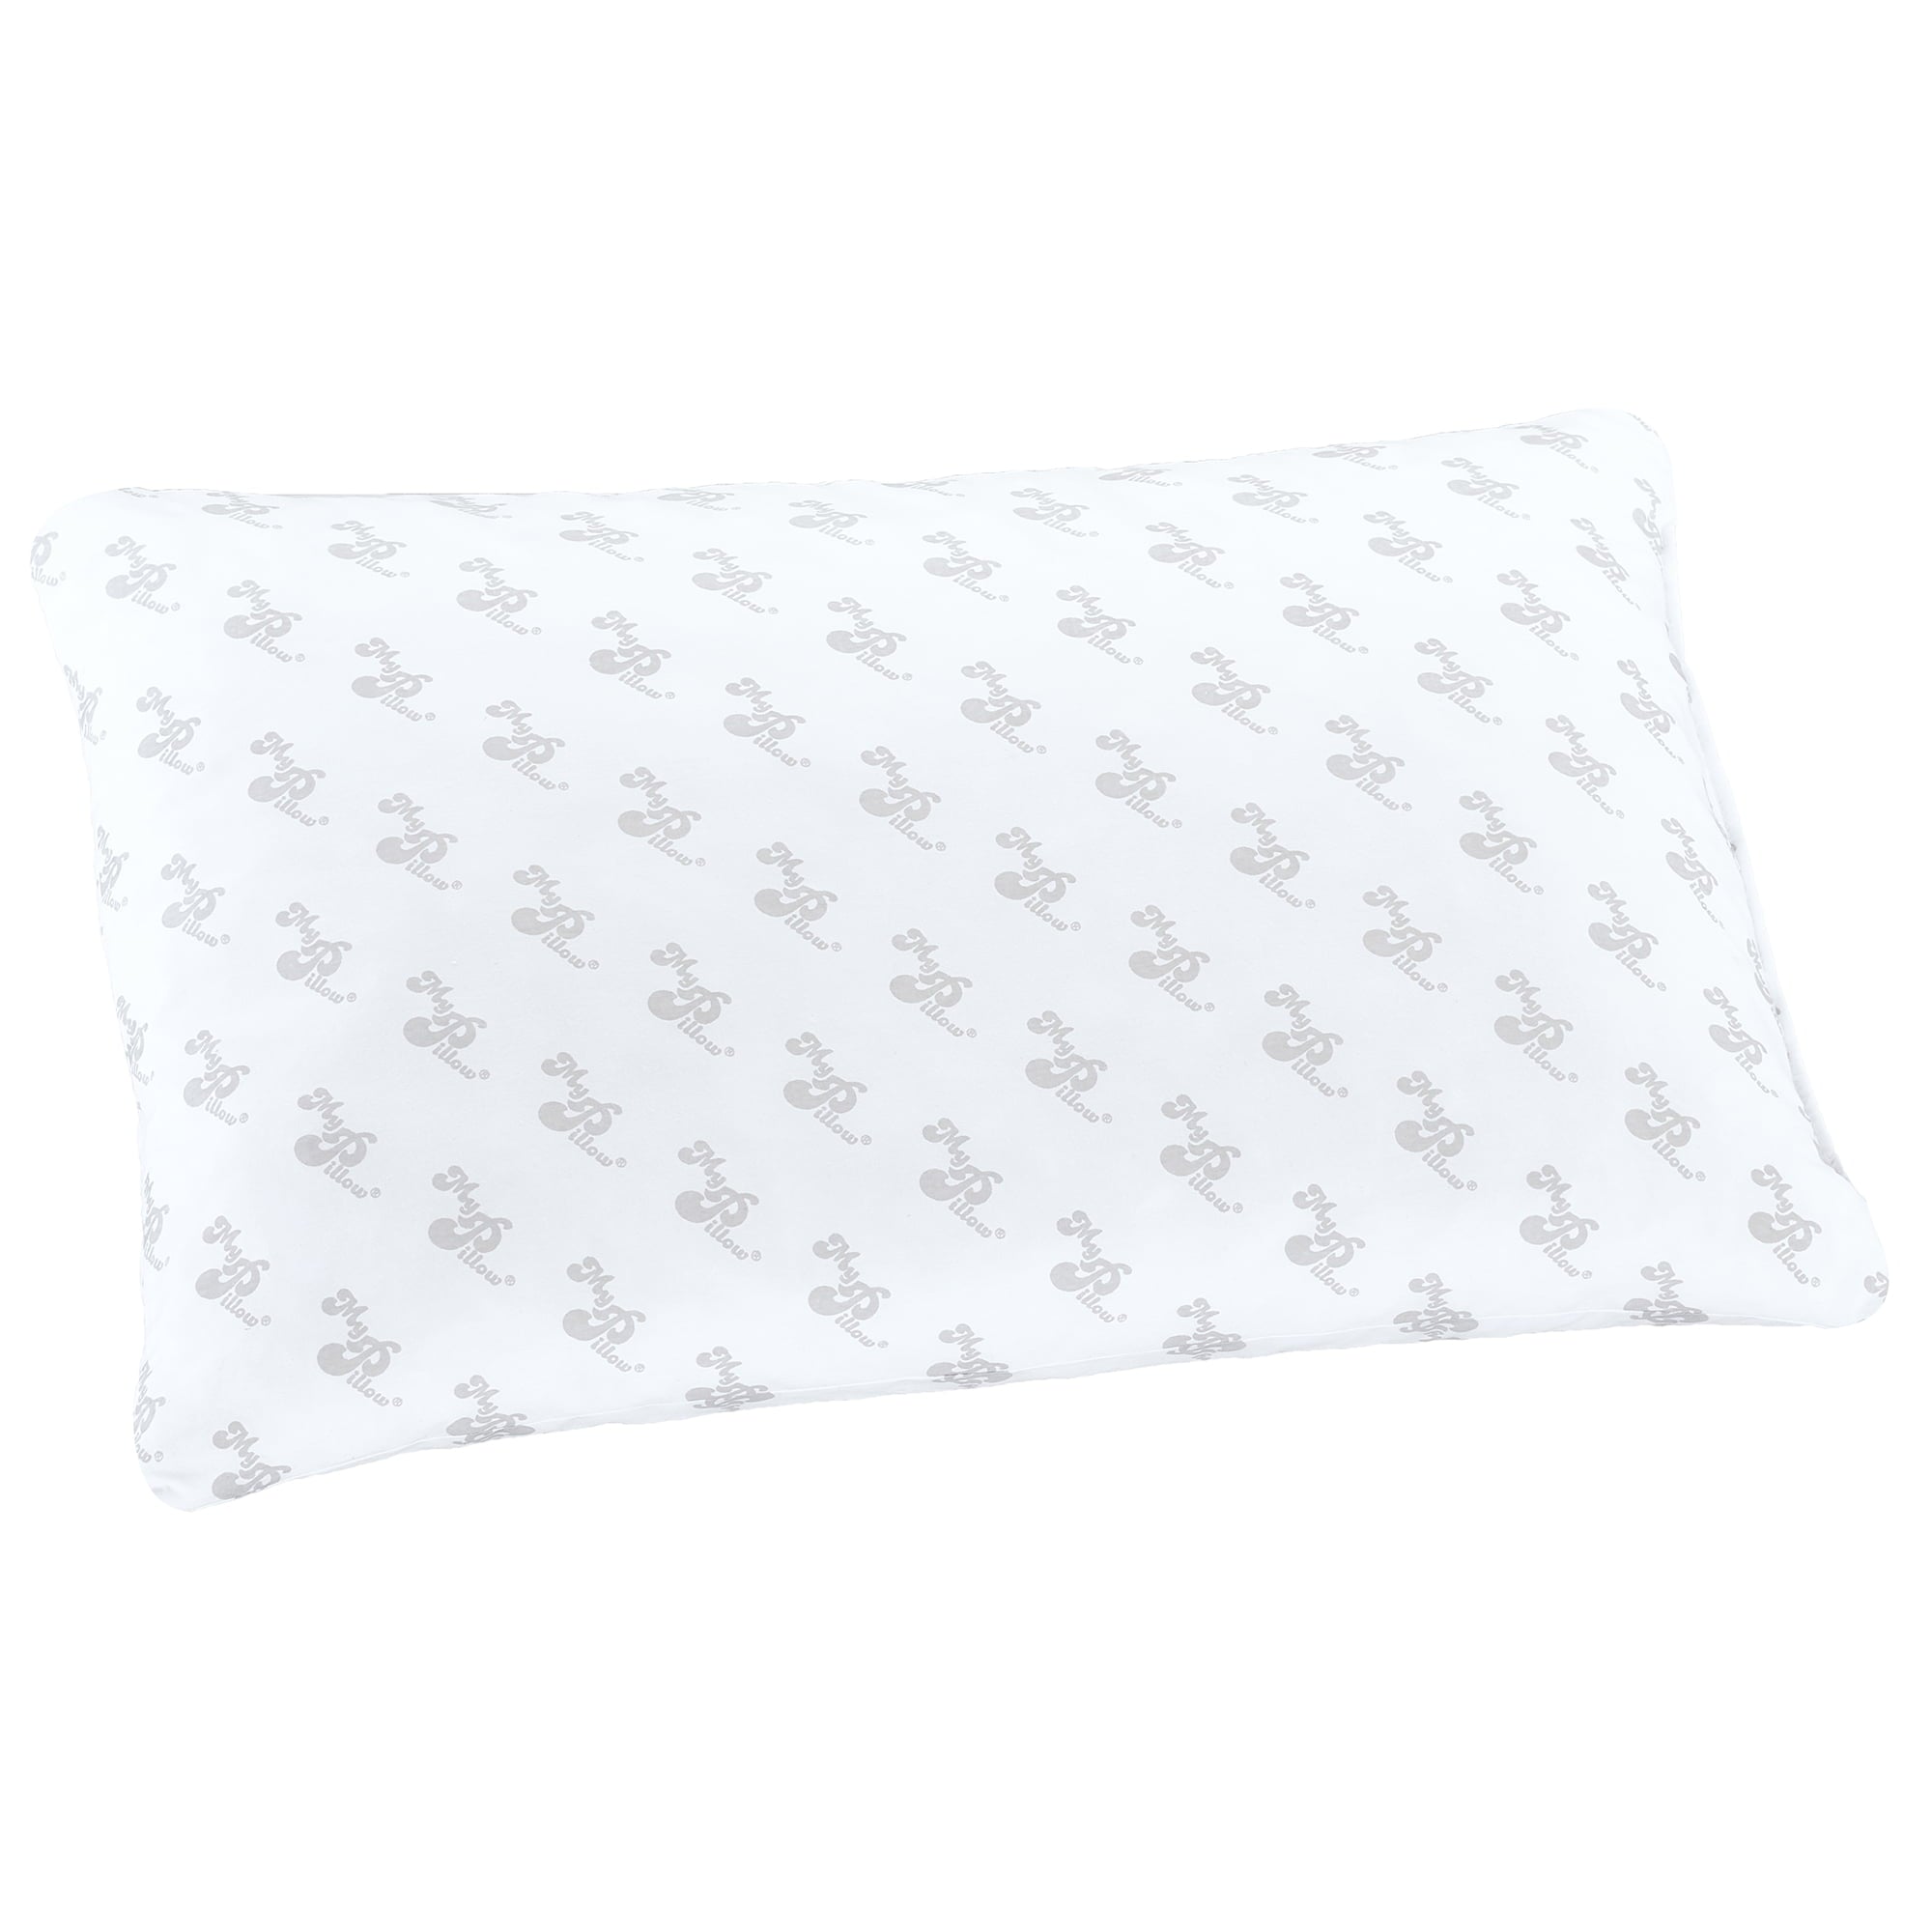 MyPillow Classic, Standard Size and Medium Support, 1 Pillow